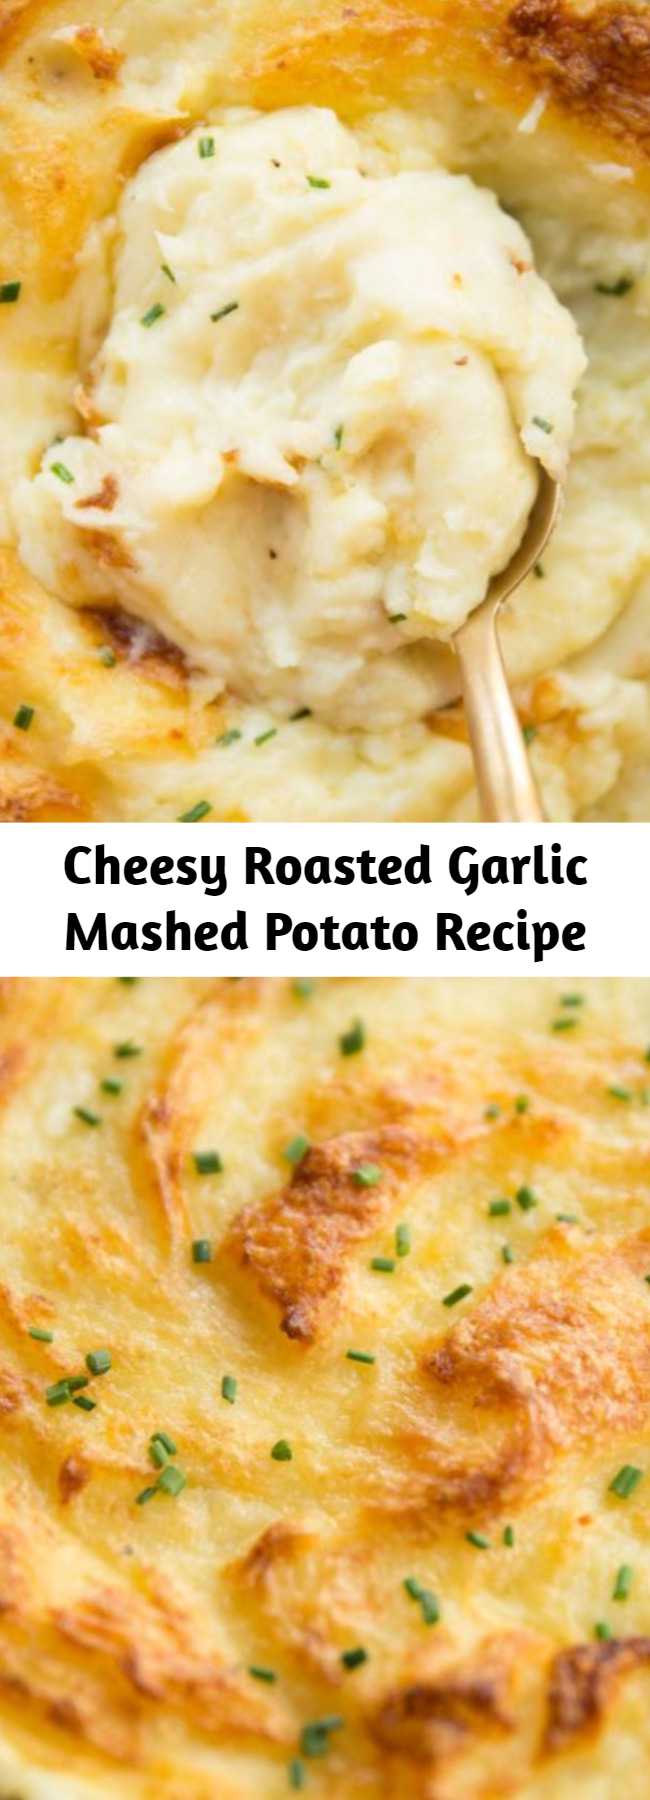 Cheesy Roasted Garlic Mashed Potato Recipe - This Roasted Garlic Mashed Potato is loaded with Butter, Cream and Cheese, then baked in the oven until ultra crisp on top and gooey underneath. #cheese #cheesy #potato #mashedpotatoes #roastedgarlic #garlicpotatoes